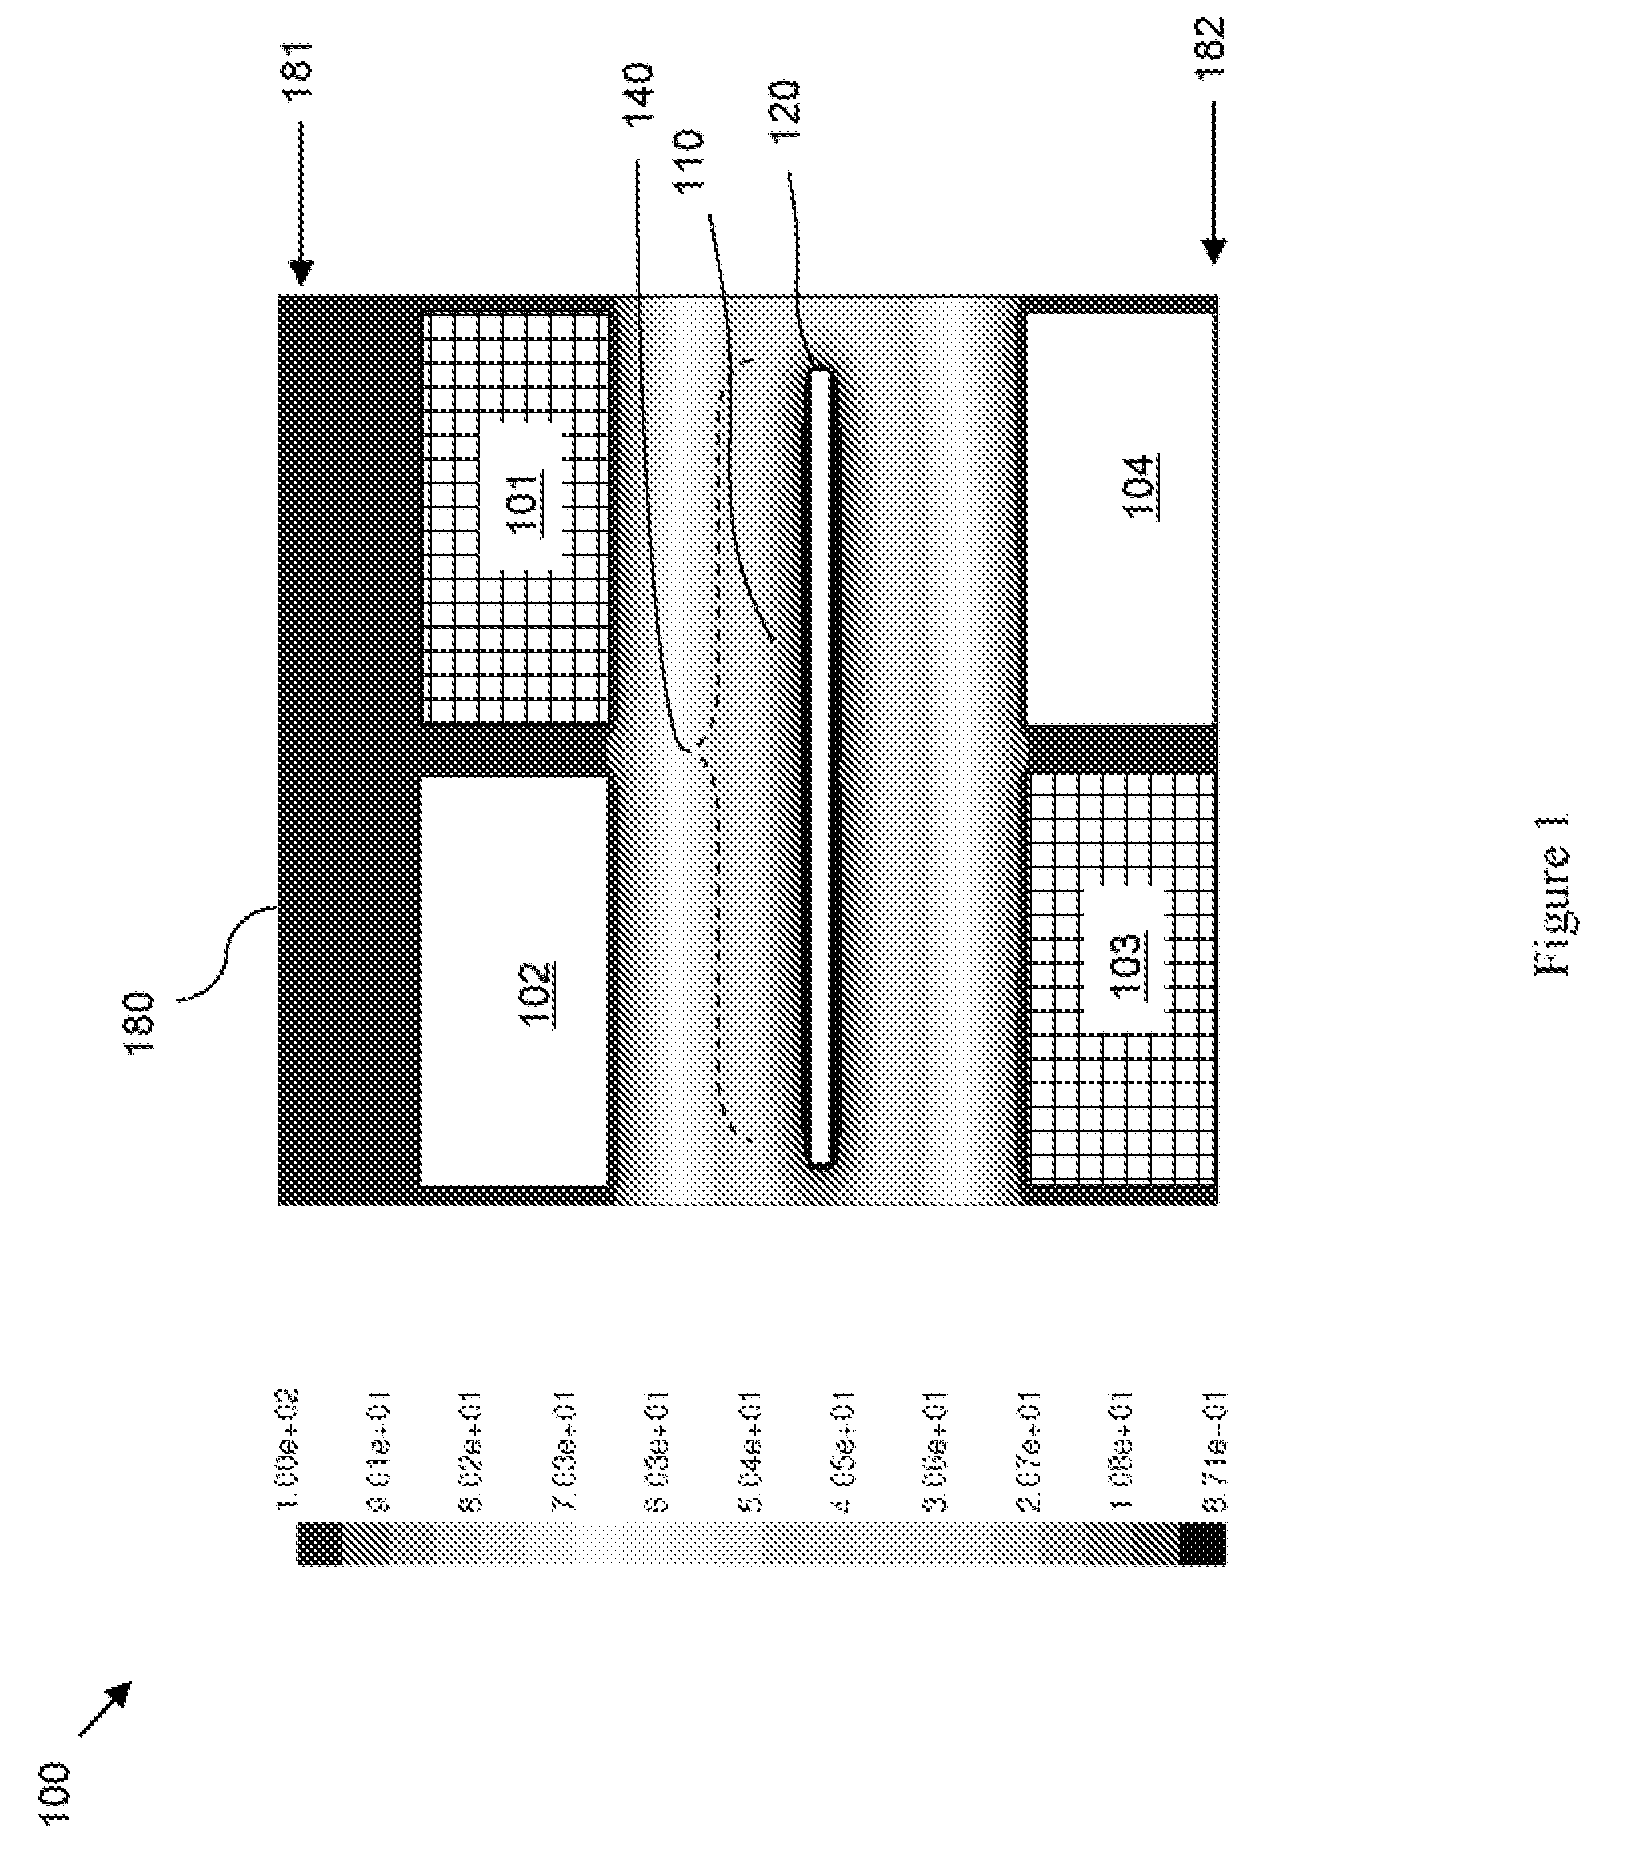 Multi-anode system for uniform plating of alloys